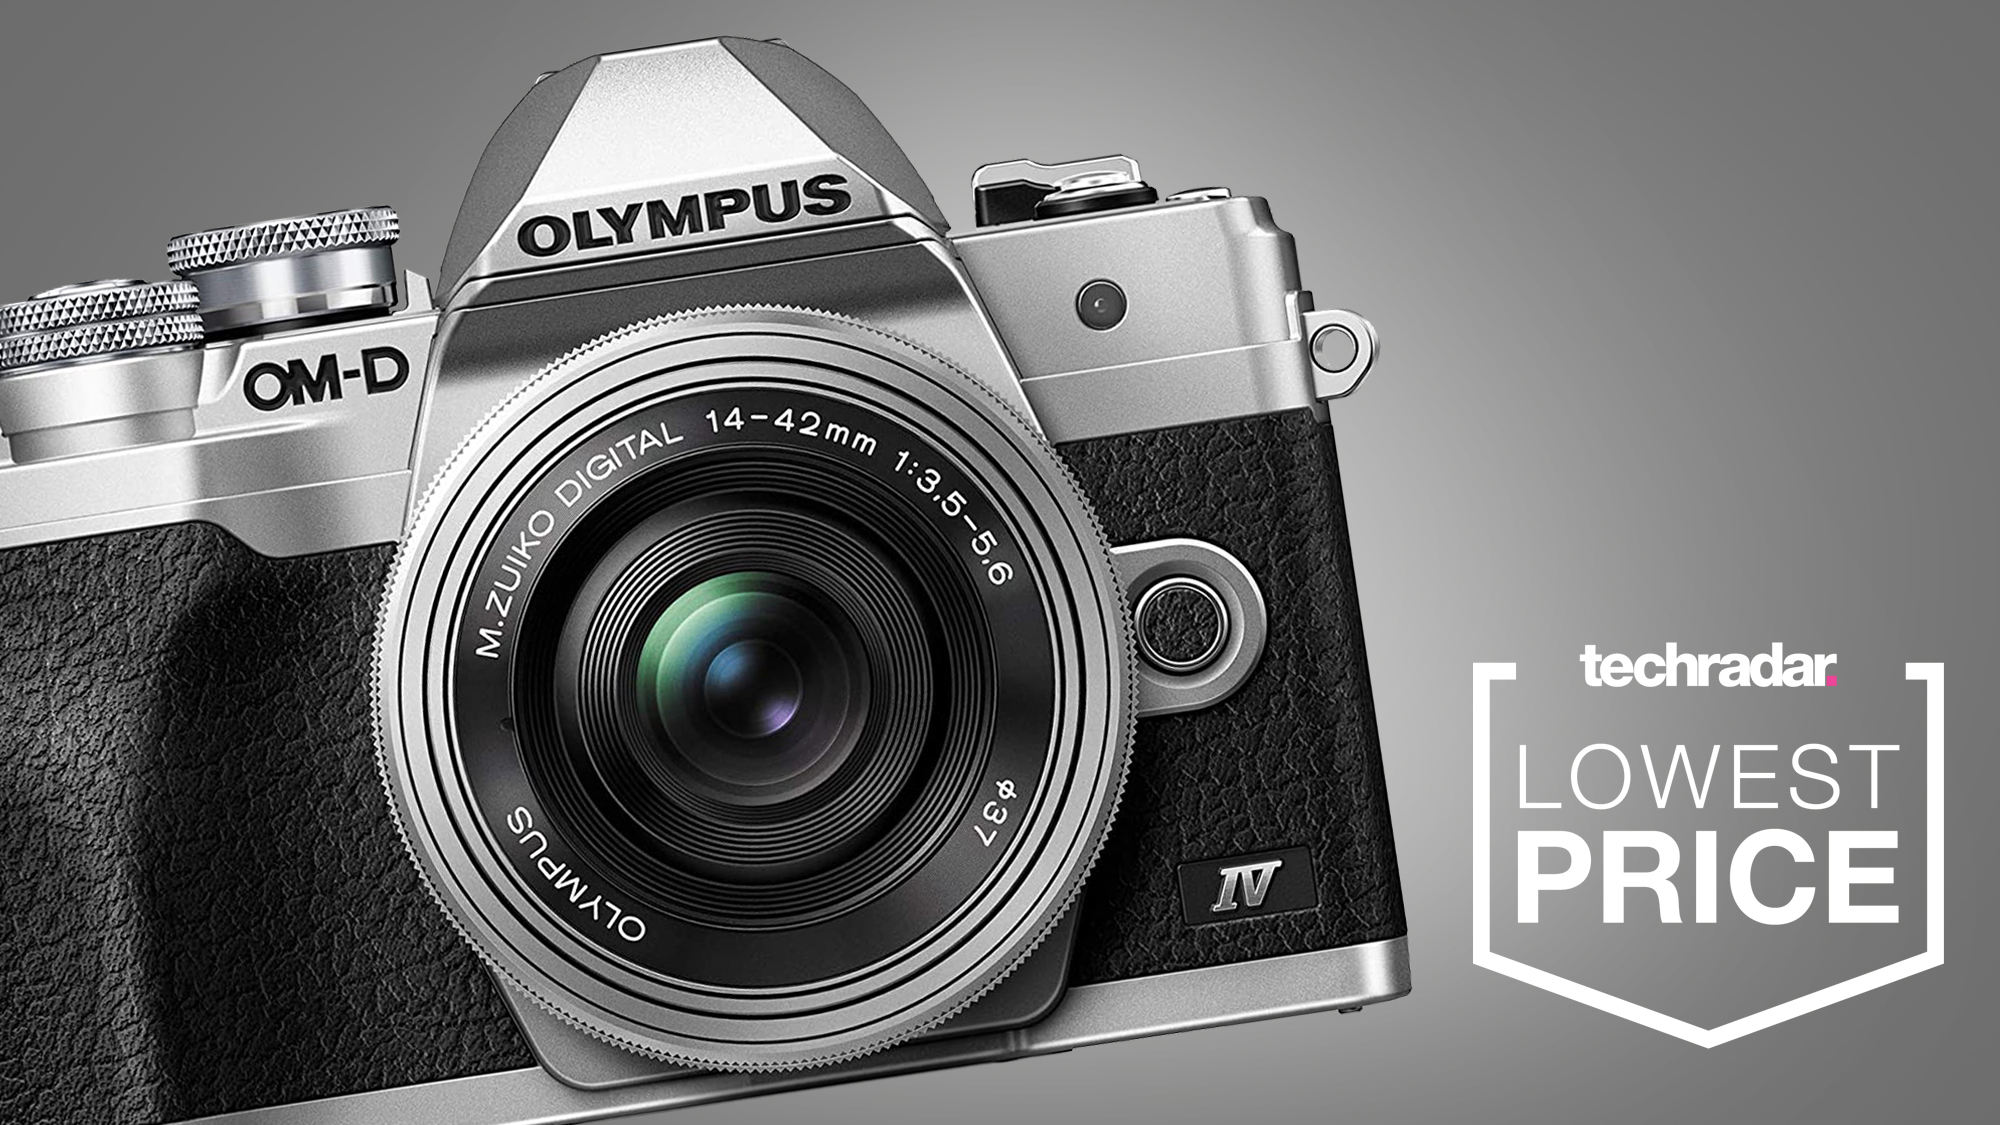 Buy Olympus OM-D E-M10 Mark IV Mirrorless Camera in Silver with 14